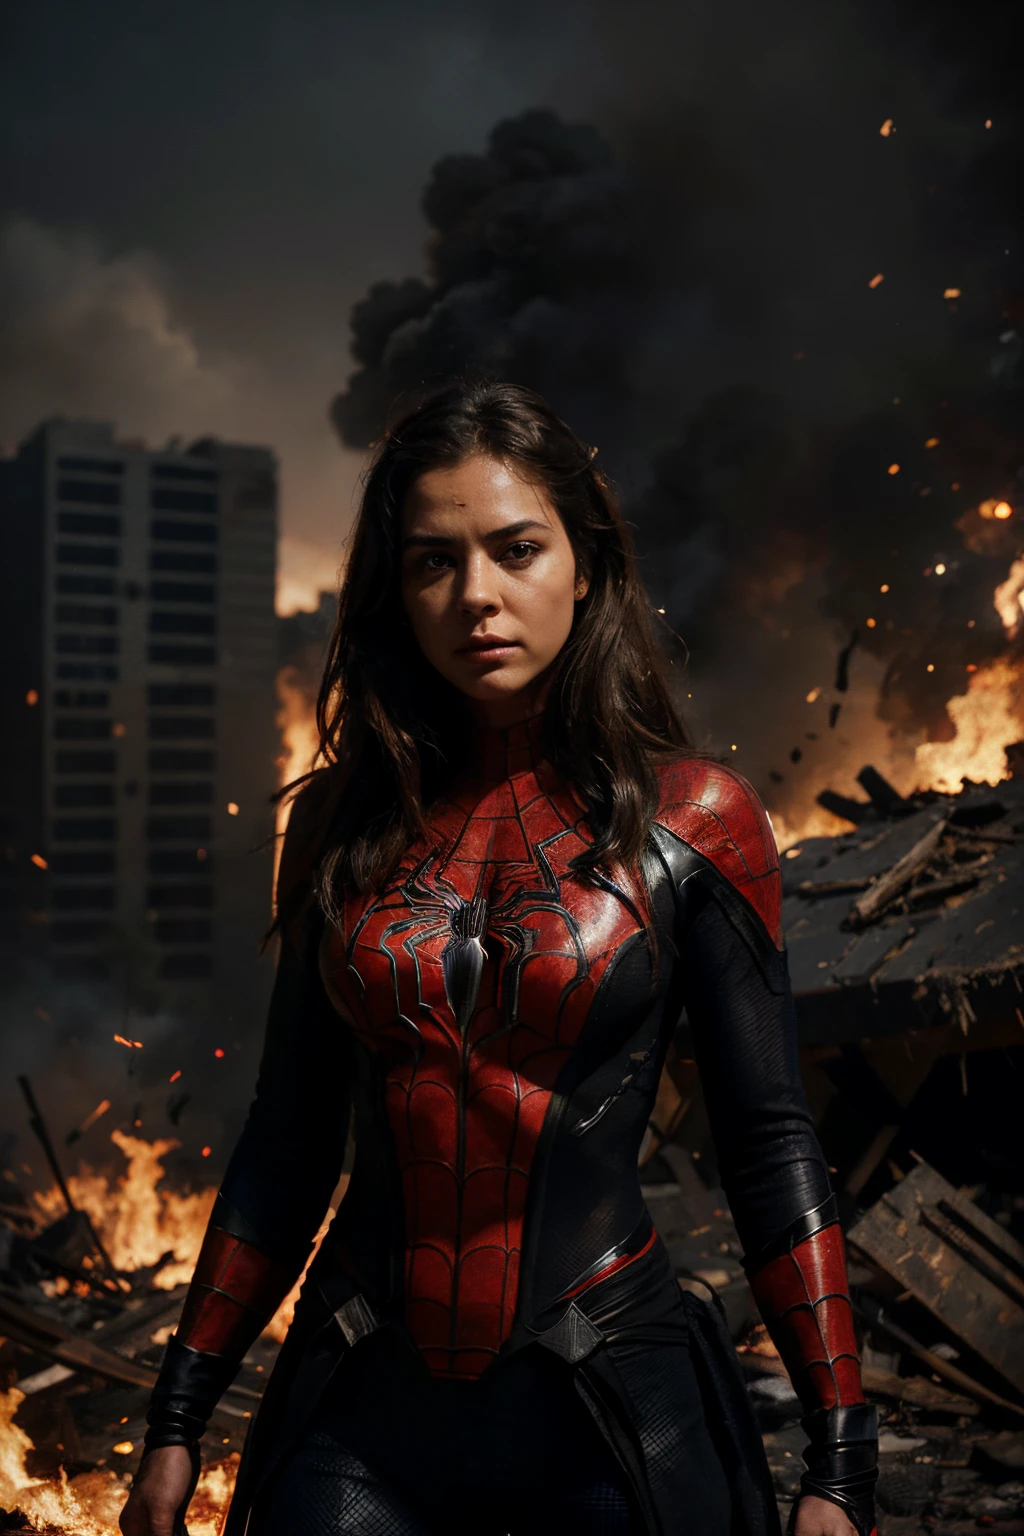 Create an image with advanced image quality and resolution, featuring super detailed depiction of a woman wearing a Spider-Man-inspired outfit. Position her at the center of the composition, with a war-torn backdrop engulfed in flames. Ensure the portrayal of the intricacies of the costume, capturing textures and unique features. The fiery war scene should be realistically rendered, incorporating elements such as smoke, debris, and dramatic lighting effects. This image is intended to convey a powerful and visually engaging scene, combining the strength of the female Spider-Man attire with the urgency and chaos of the war setting.